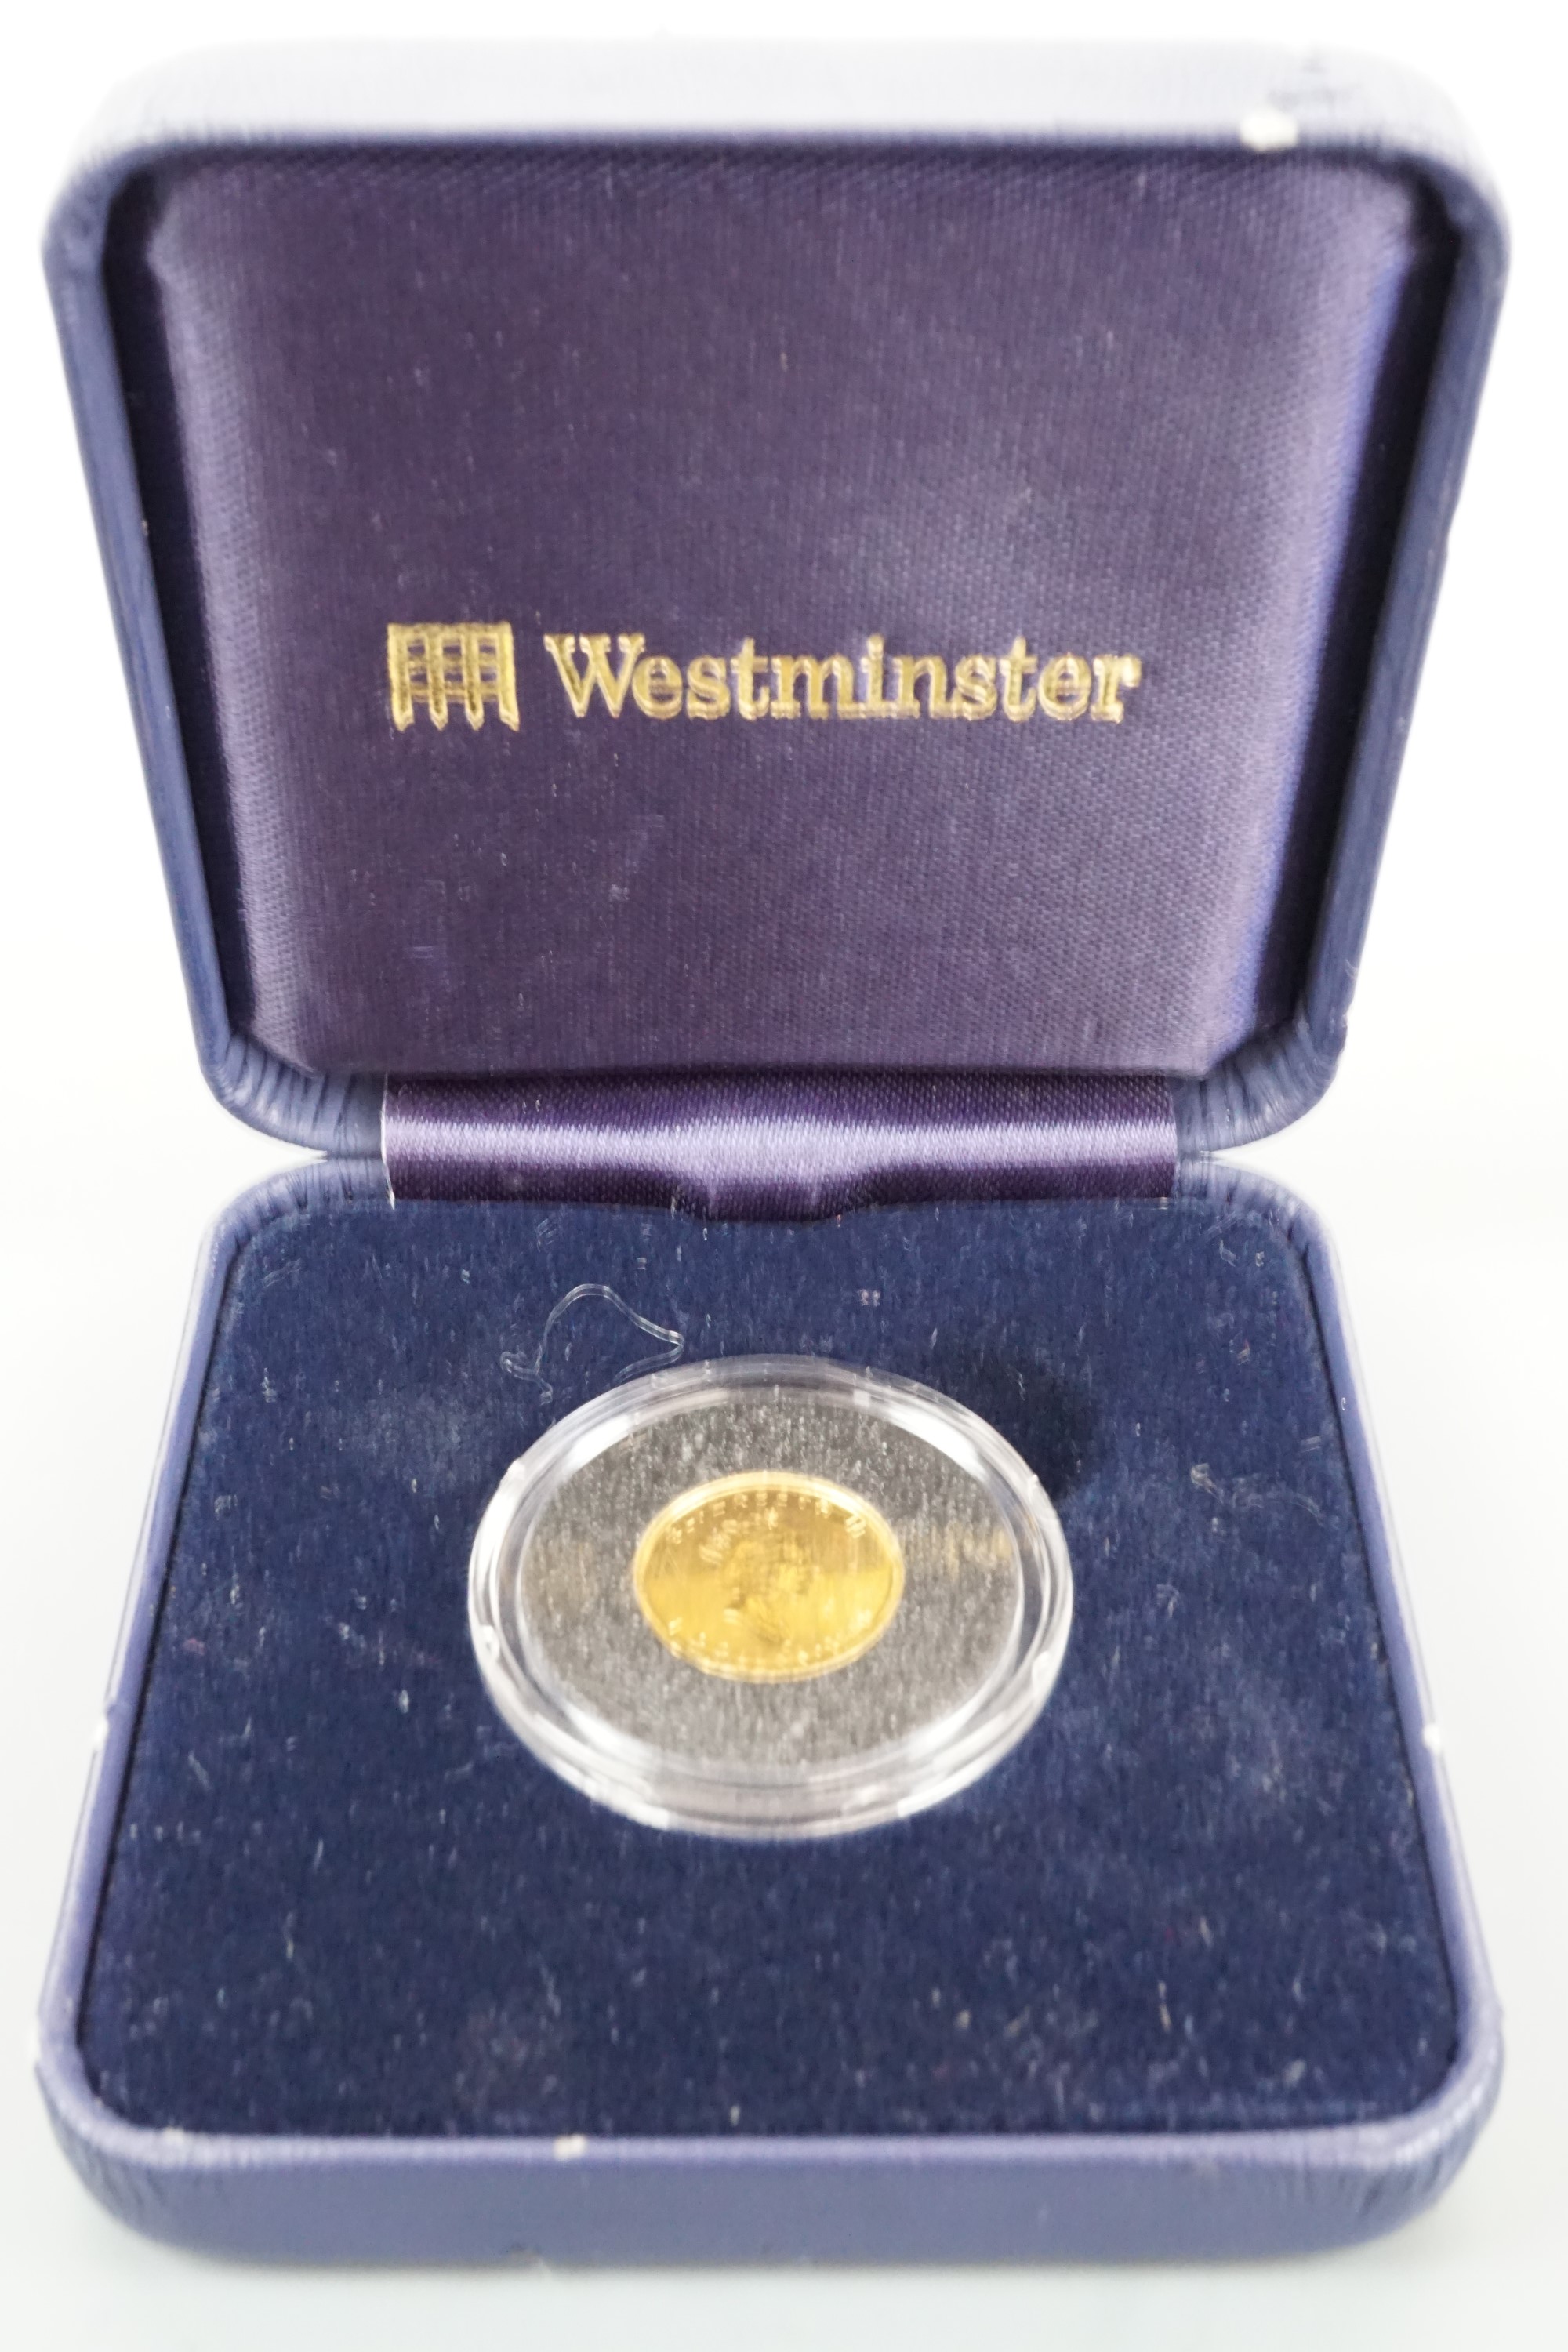 A Westminster Canada gold maple leaf one dollar coin, 1/20 oz, fine gold